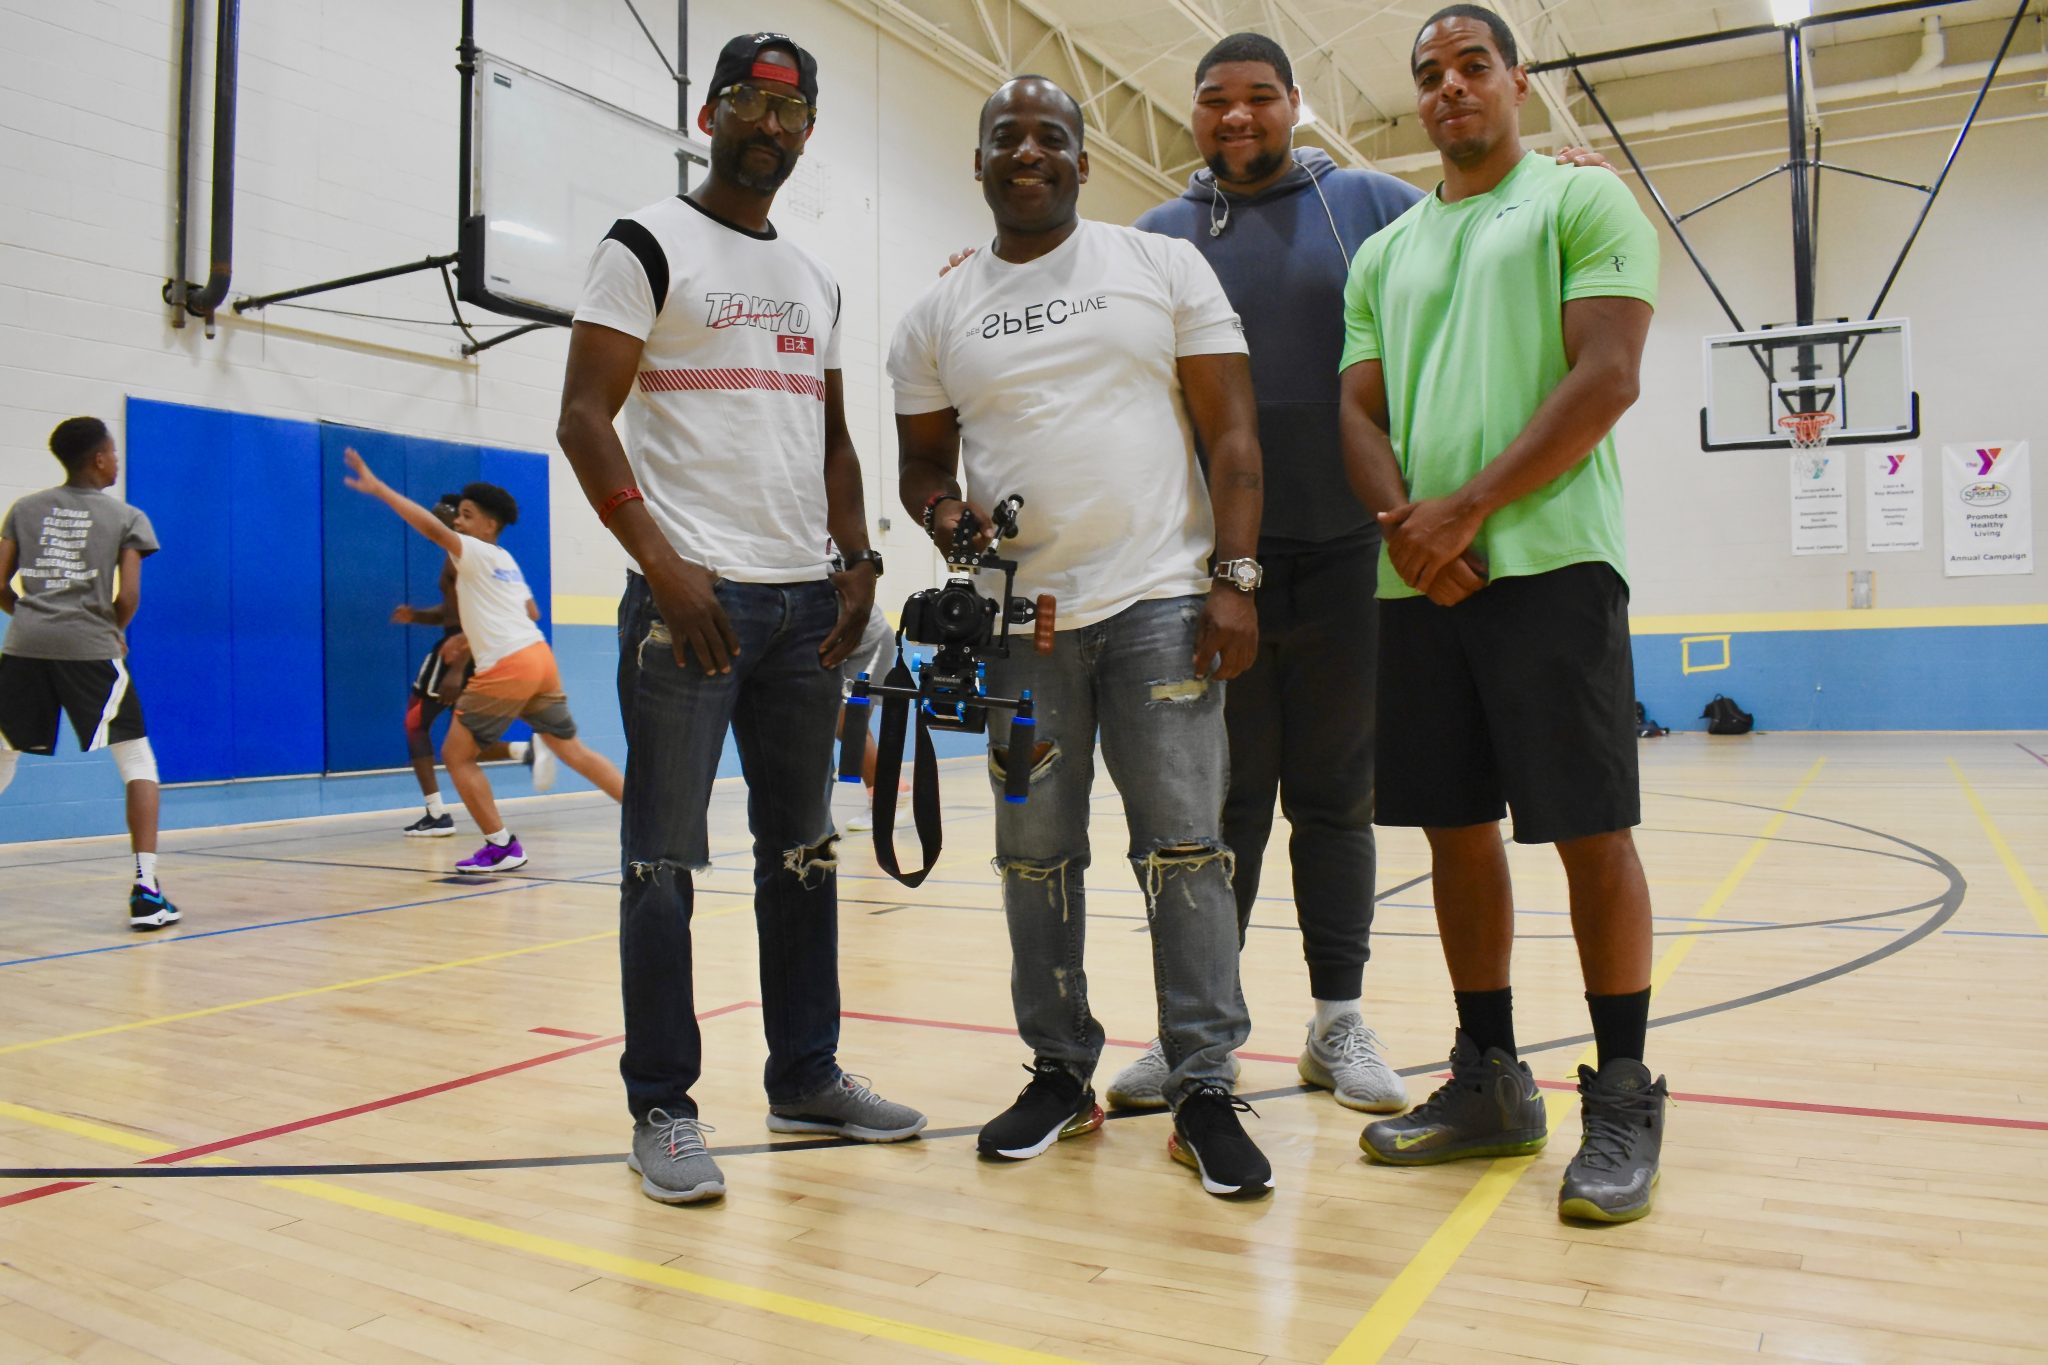 Local group of filmmakers, advocates and children produce a documentary about South Philly gun violence at the Christian Street YMCA